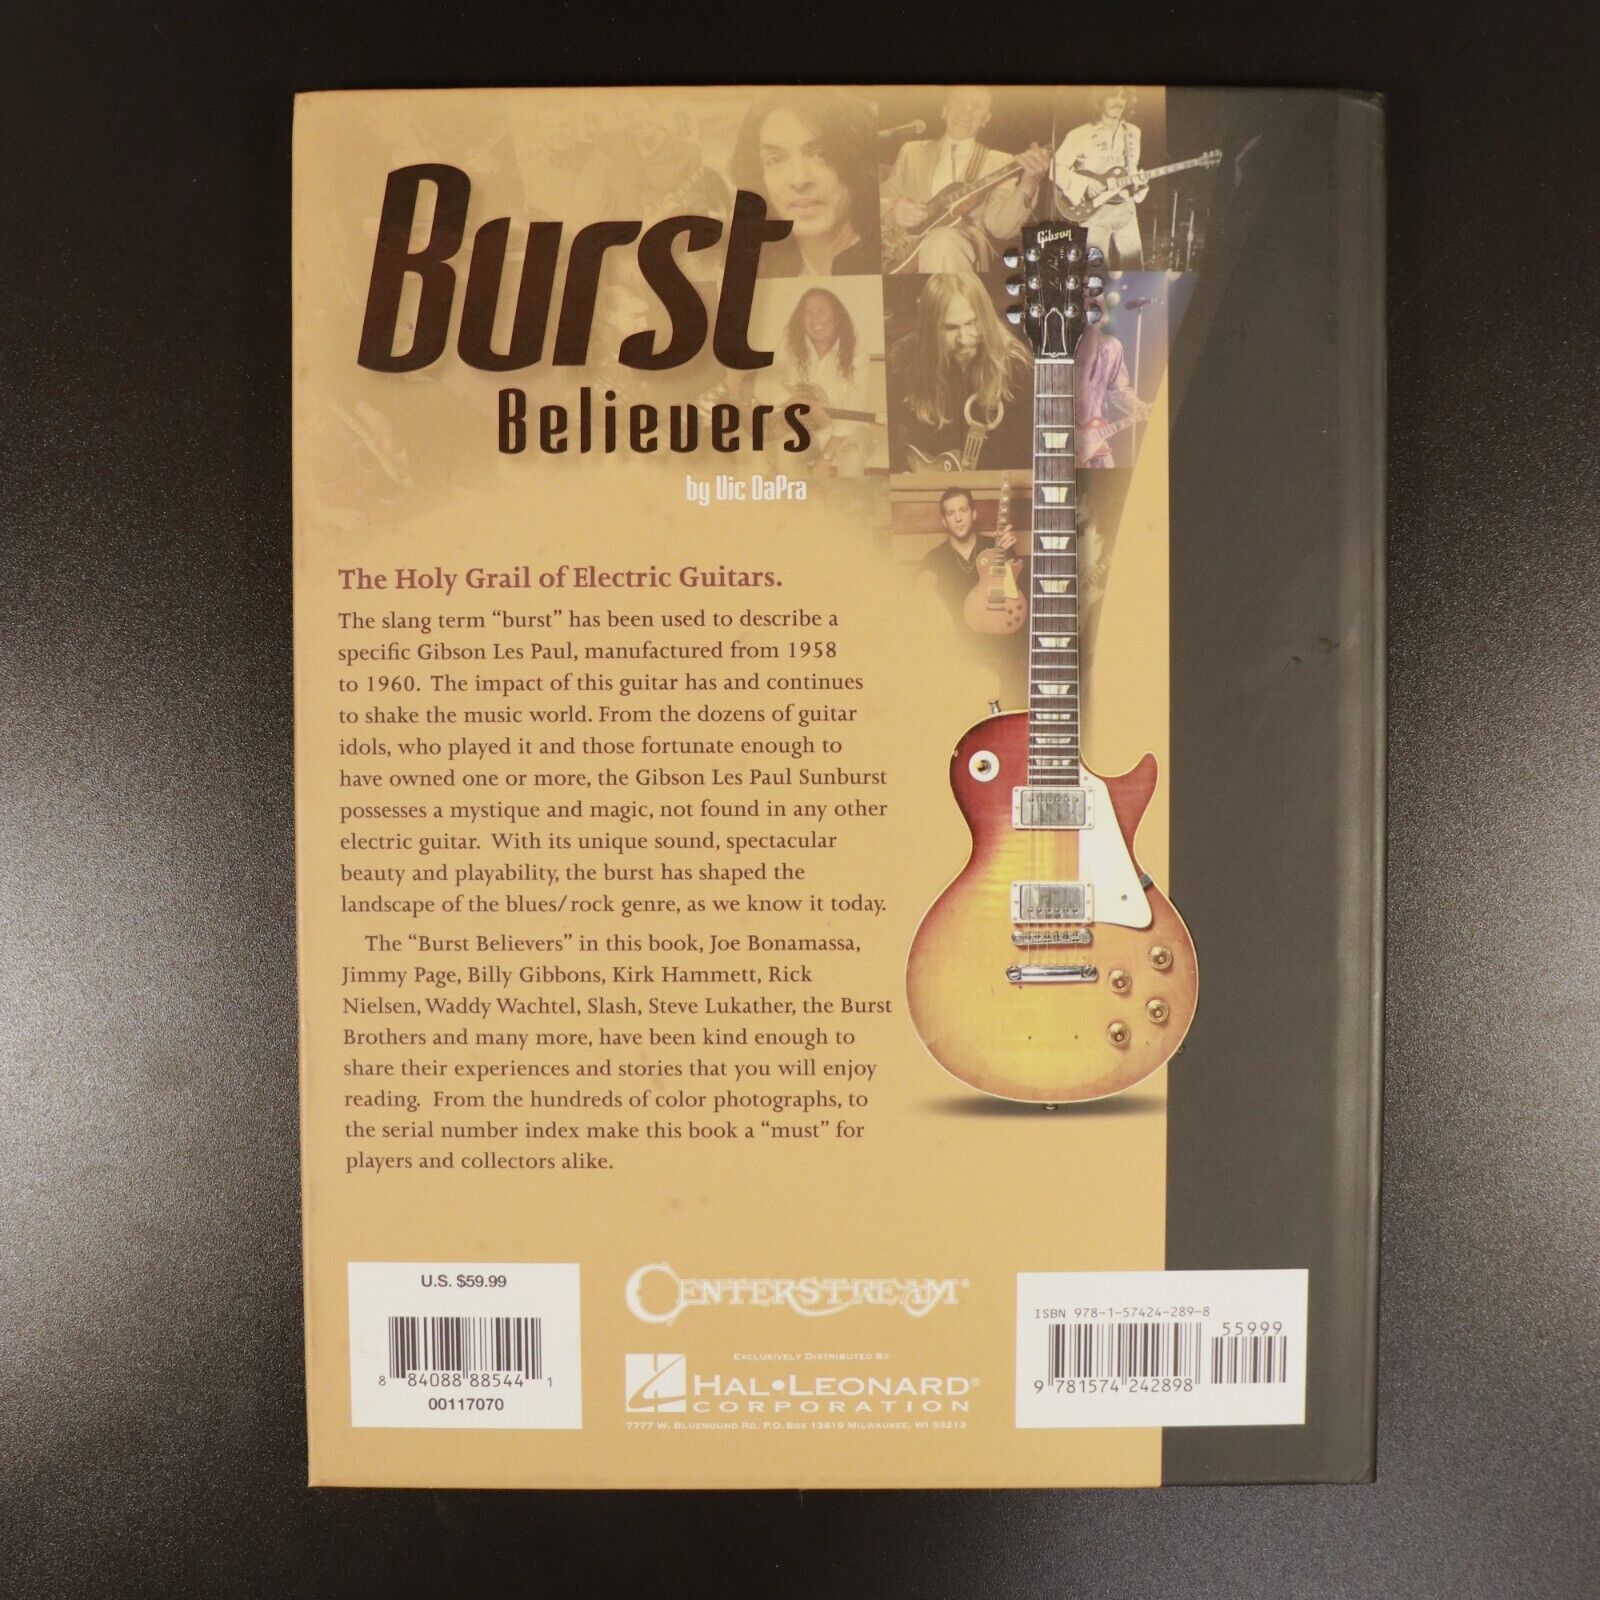 2013 Burst Believers 1 by Vic DaPra 1st Edition Gibson Les Paul Guitar Book - 0